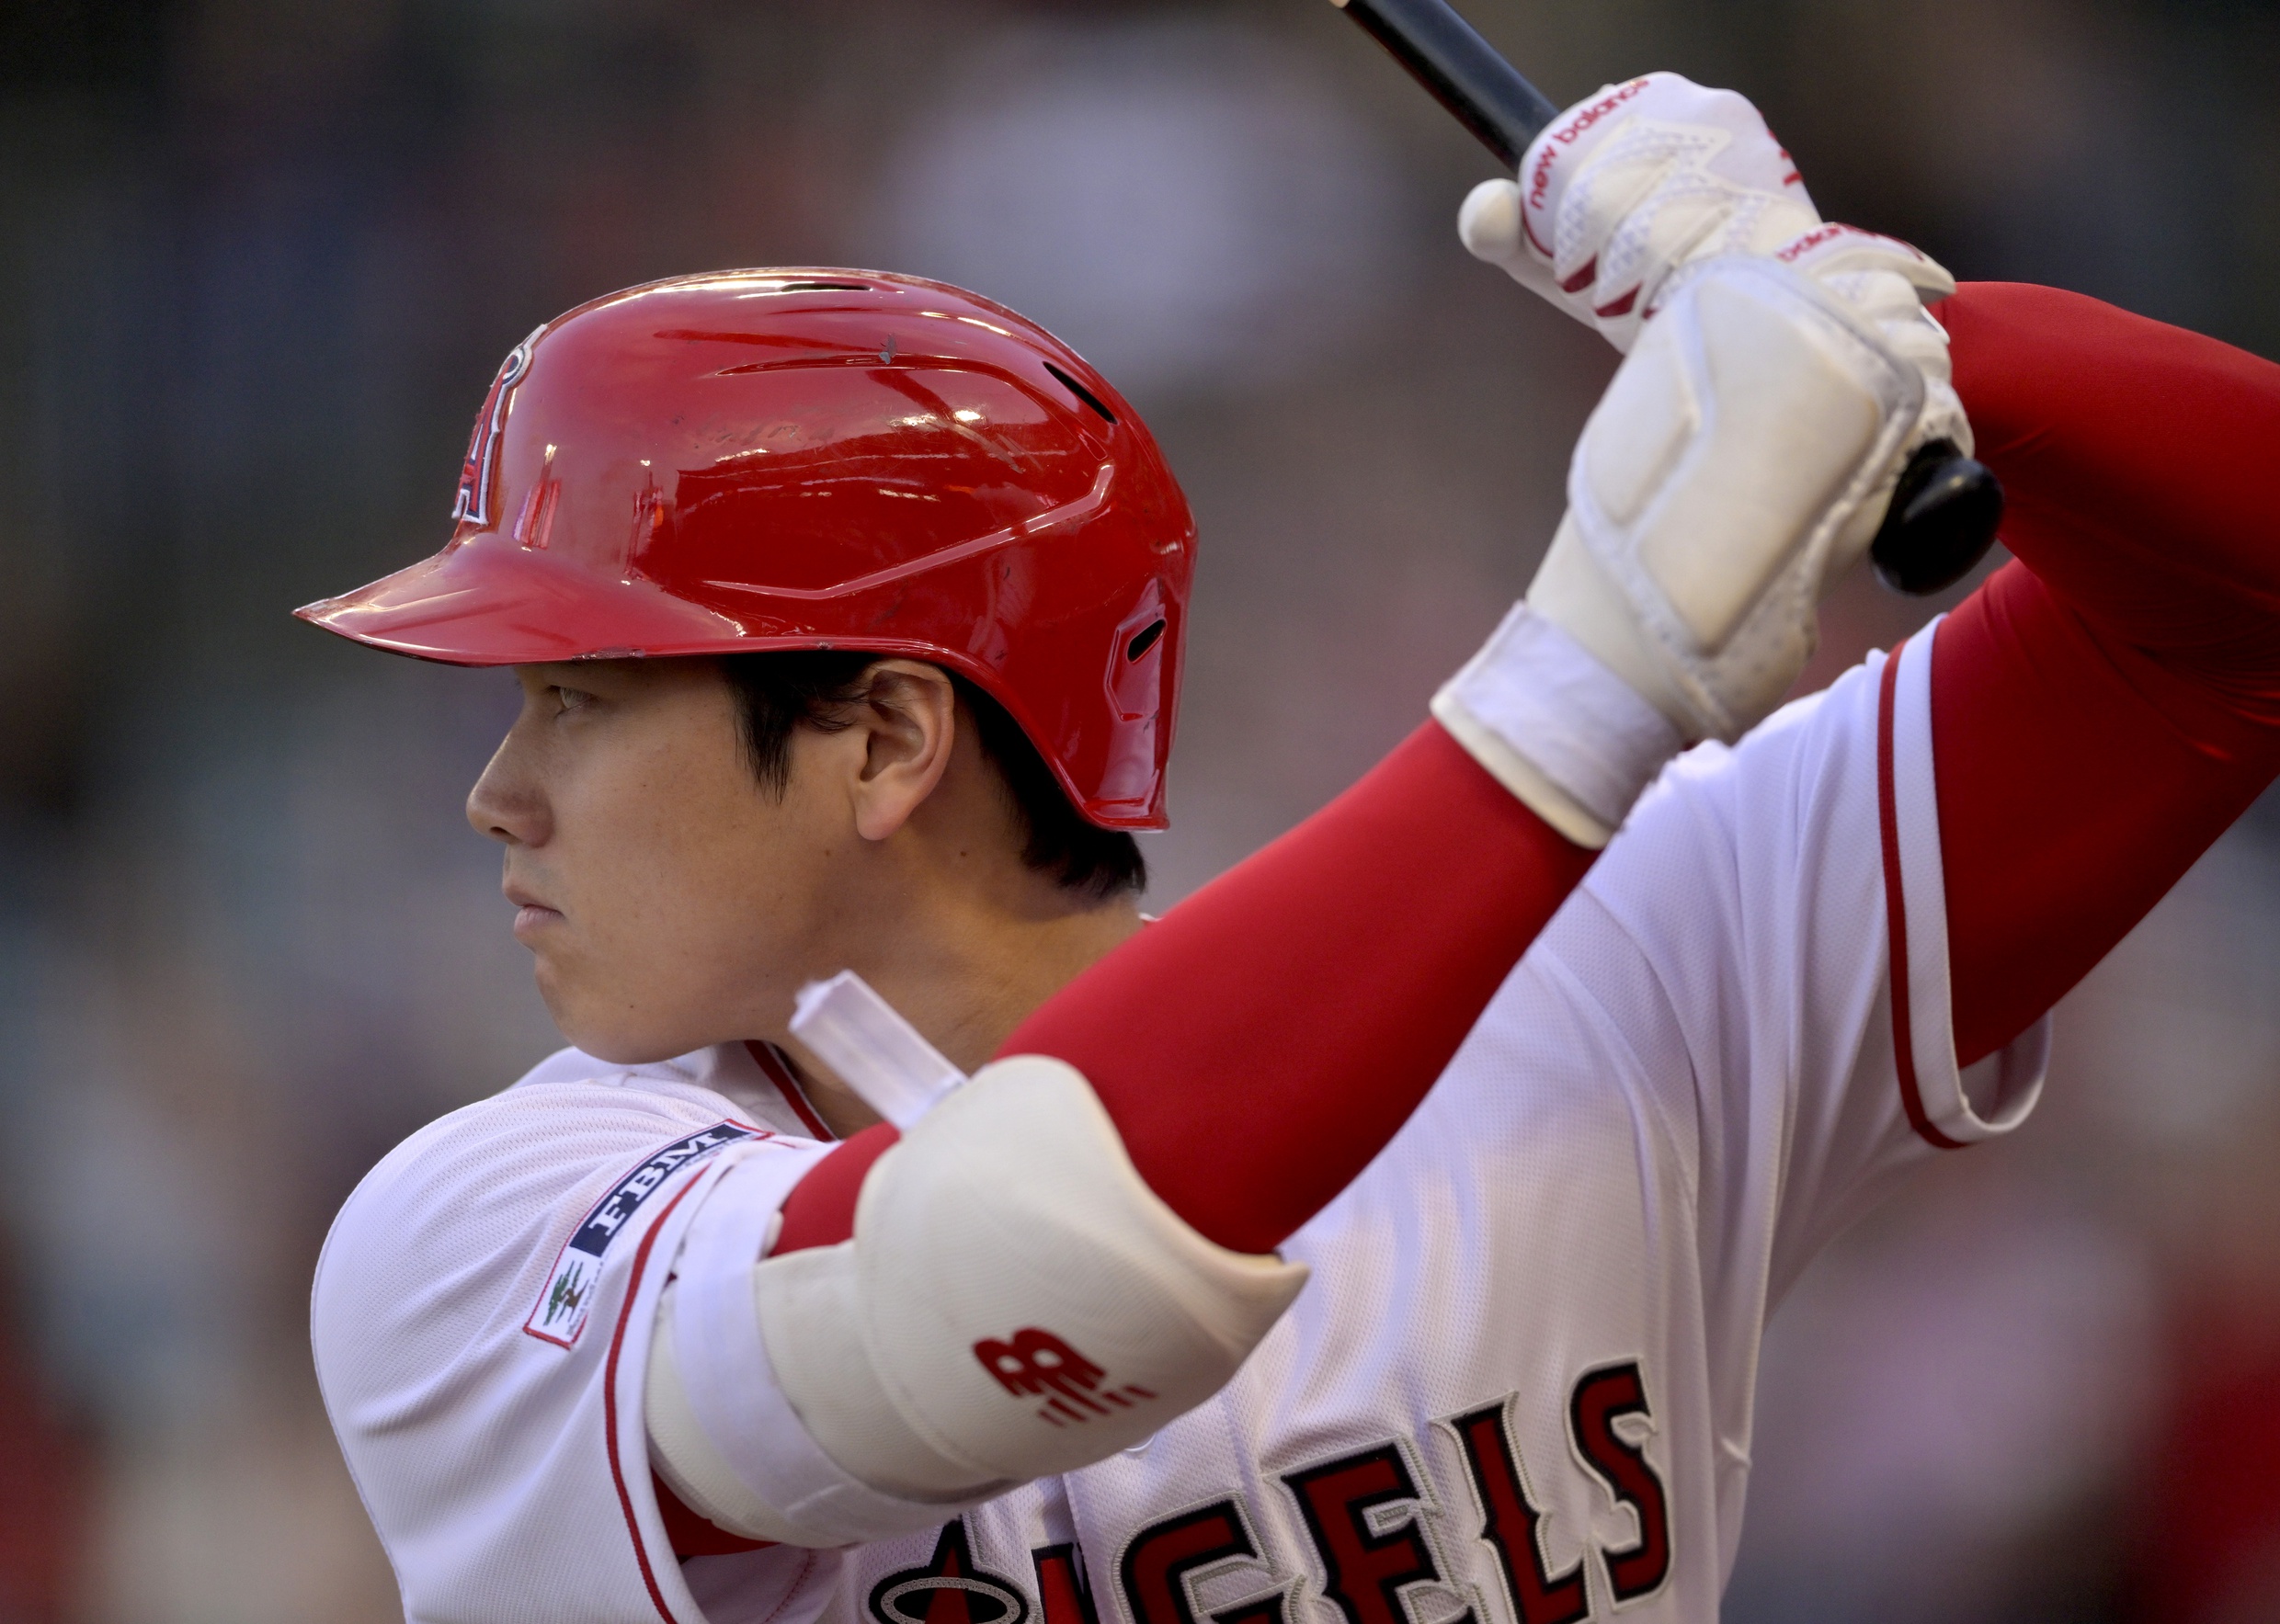 Angels History: A Quick Review of Shohei Ohtani and Angels Star